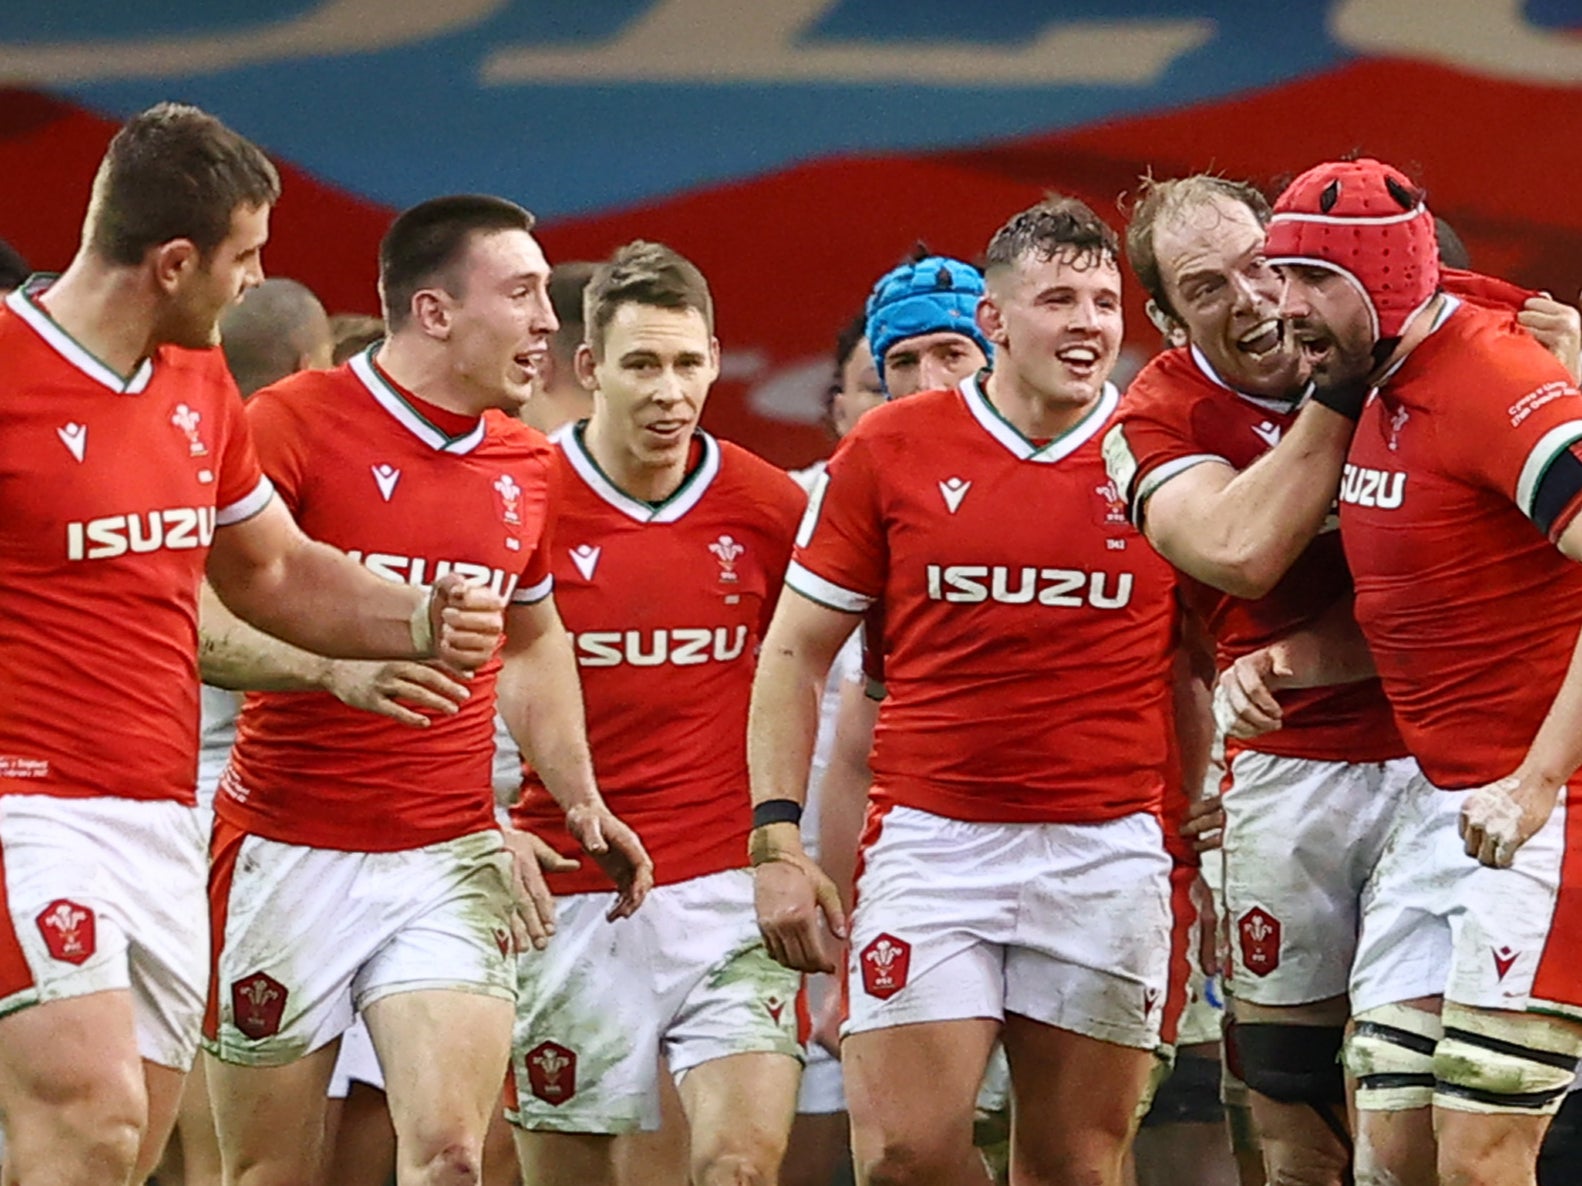 Wales travel to Paris aiming to complete the job